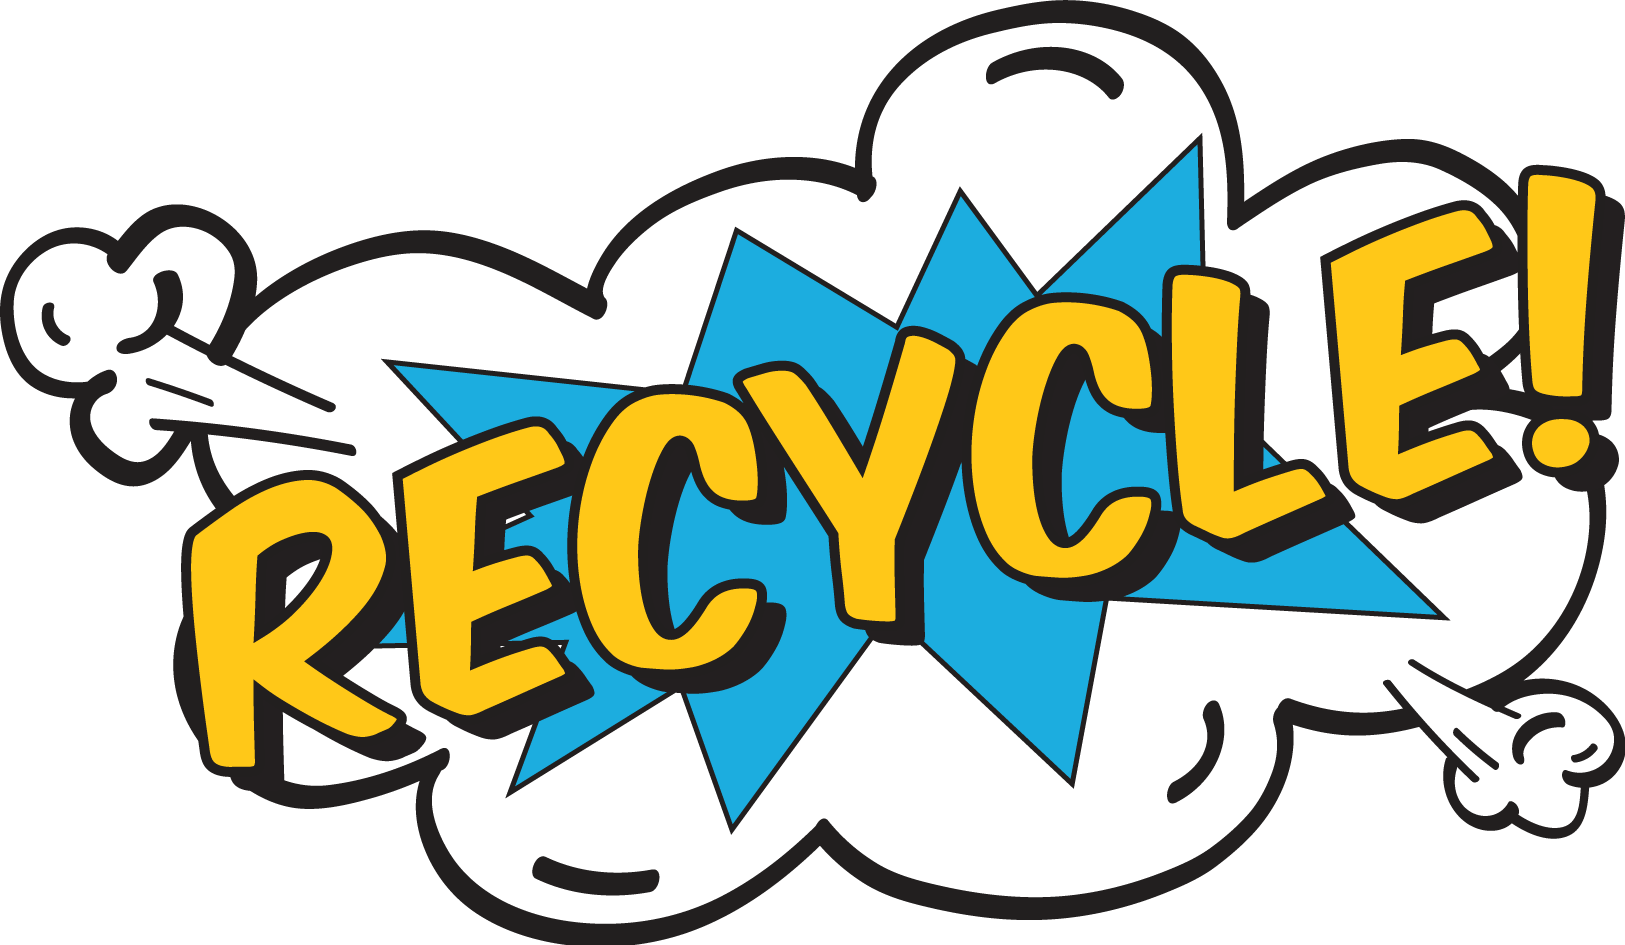 Swoop In And Save The Day By Recycling Your Used Motor - Recycle Word Art (1625x945)